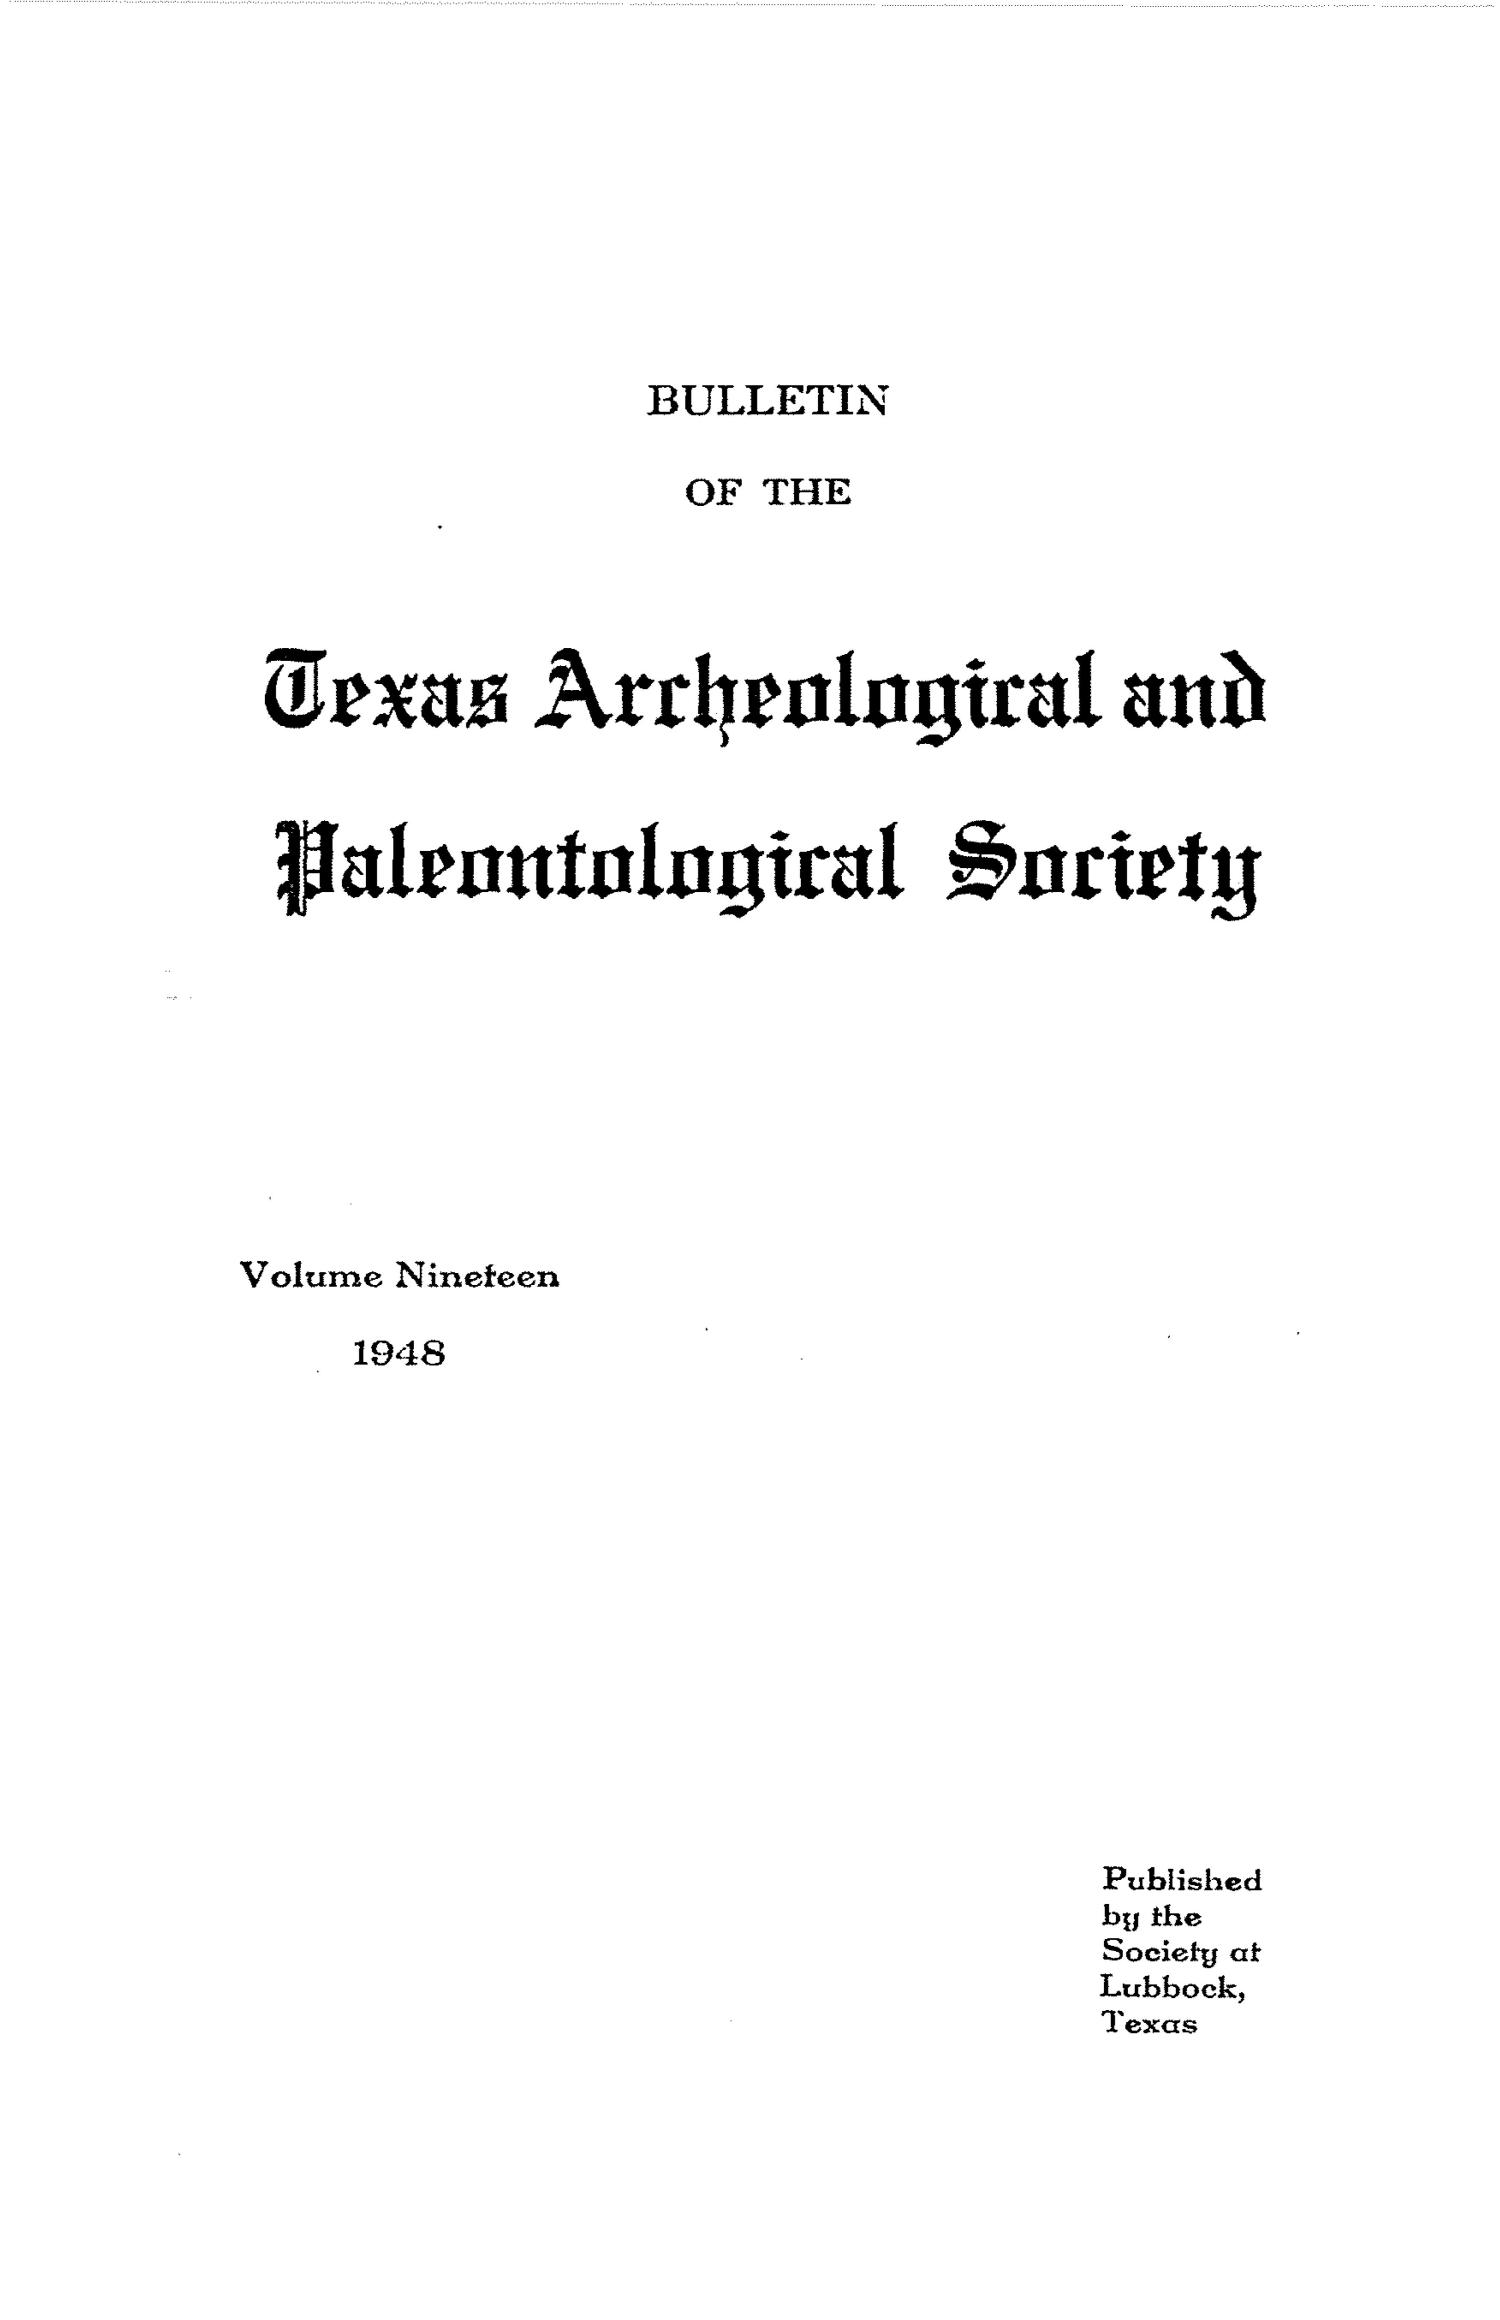 Bulletin of the Texas Archeological and Paleontological Society, Volumes 19 & 20, 1948-1949
                                                
                                                    Title Page
                                                